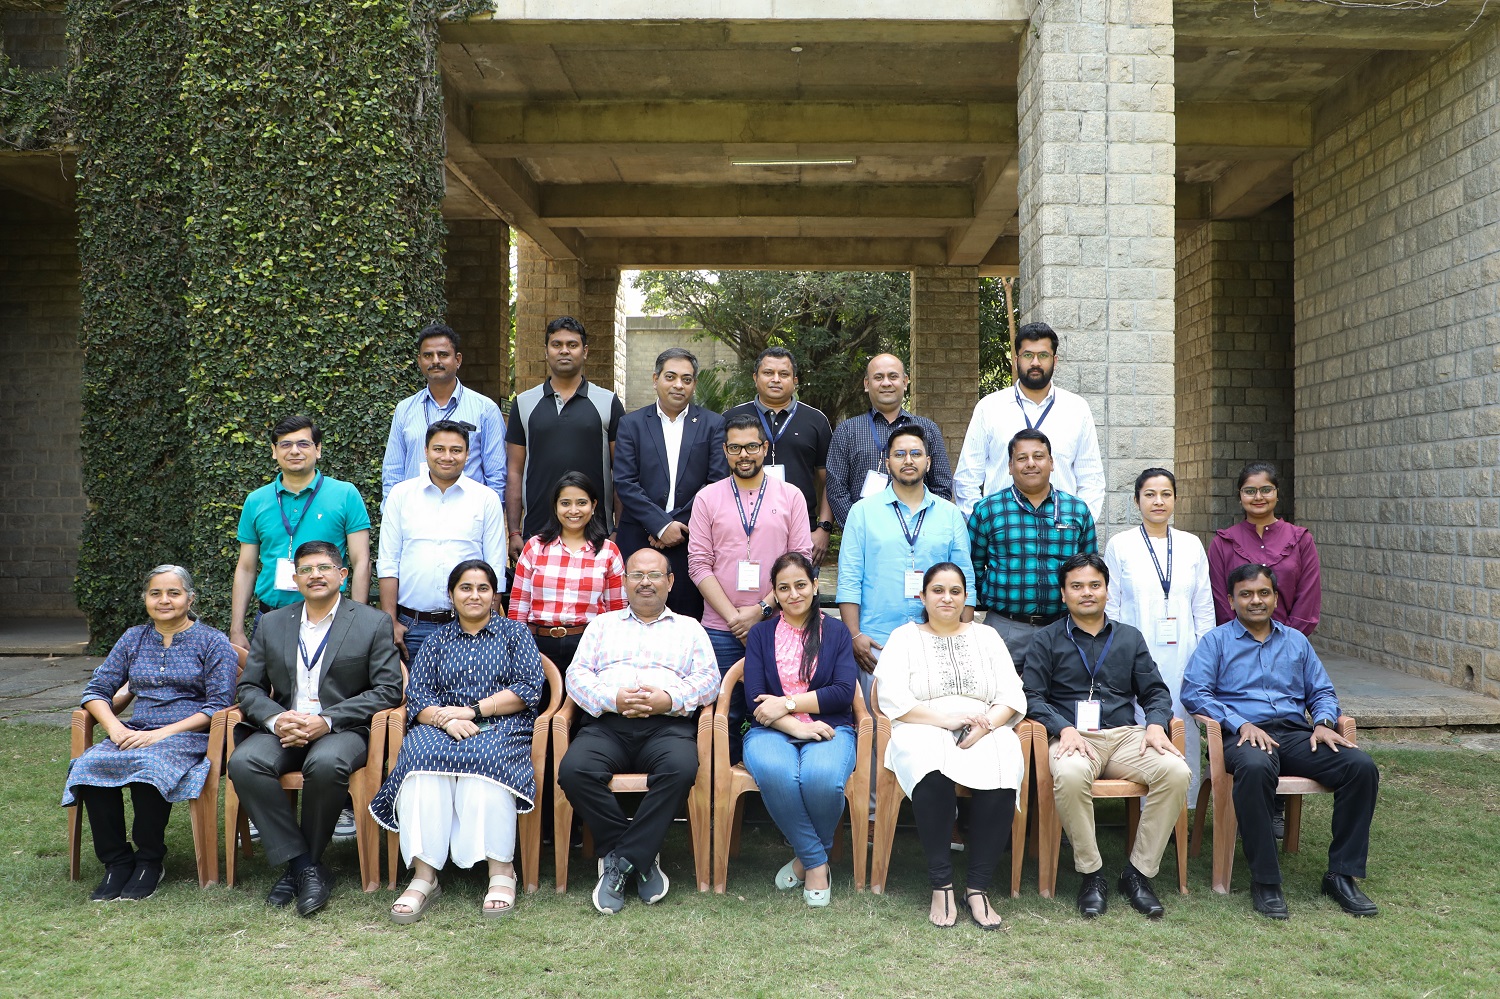 Participants of the Programme from Data to Decisions on November 17, 2022. Programme Director Prof. Shubhabrata Das is seen with them.